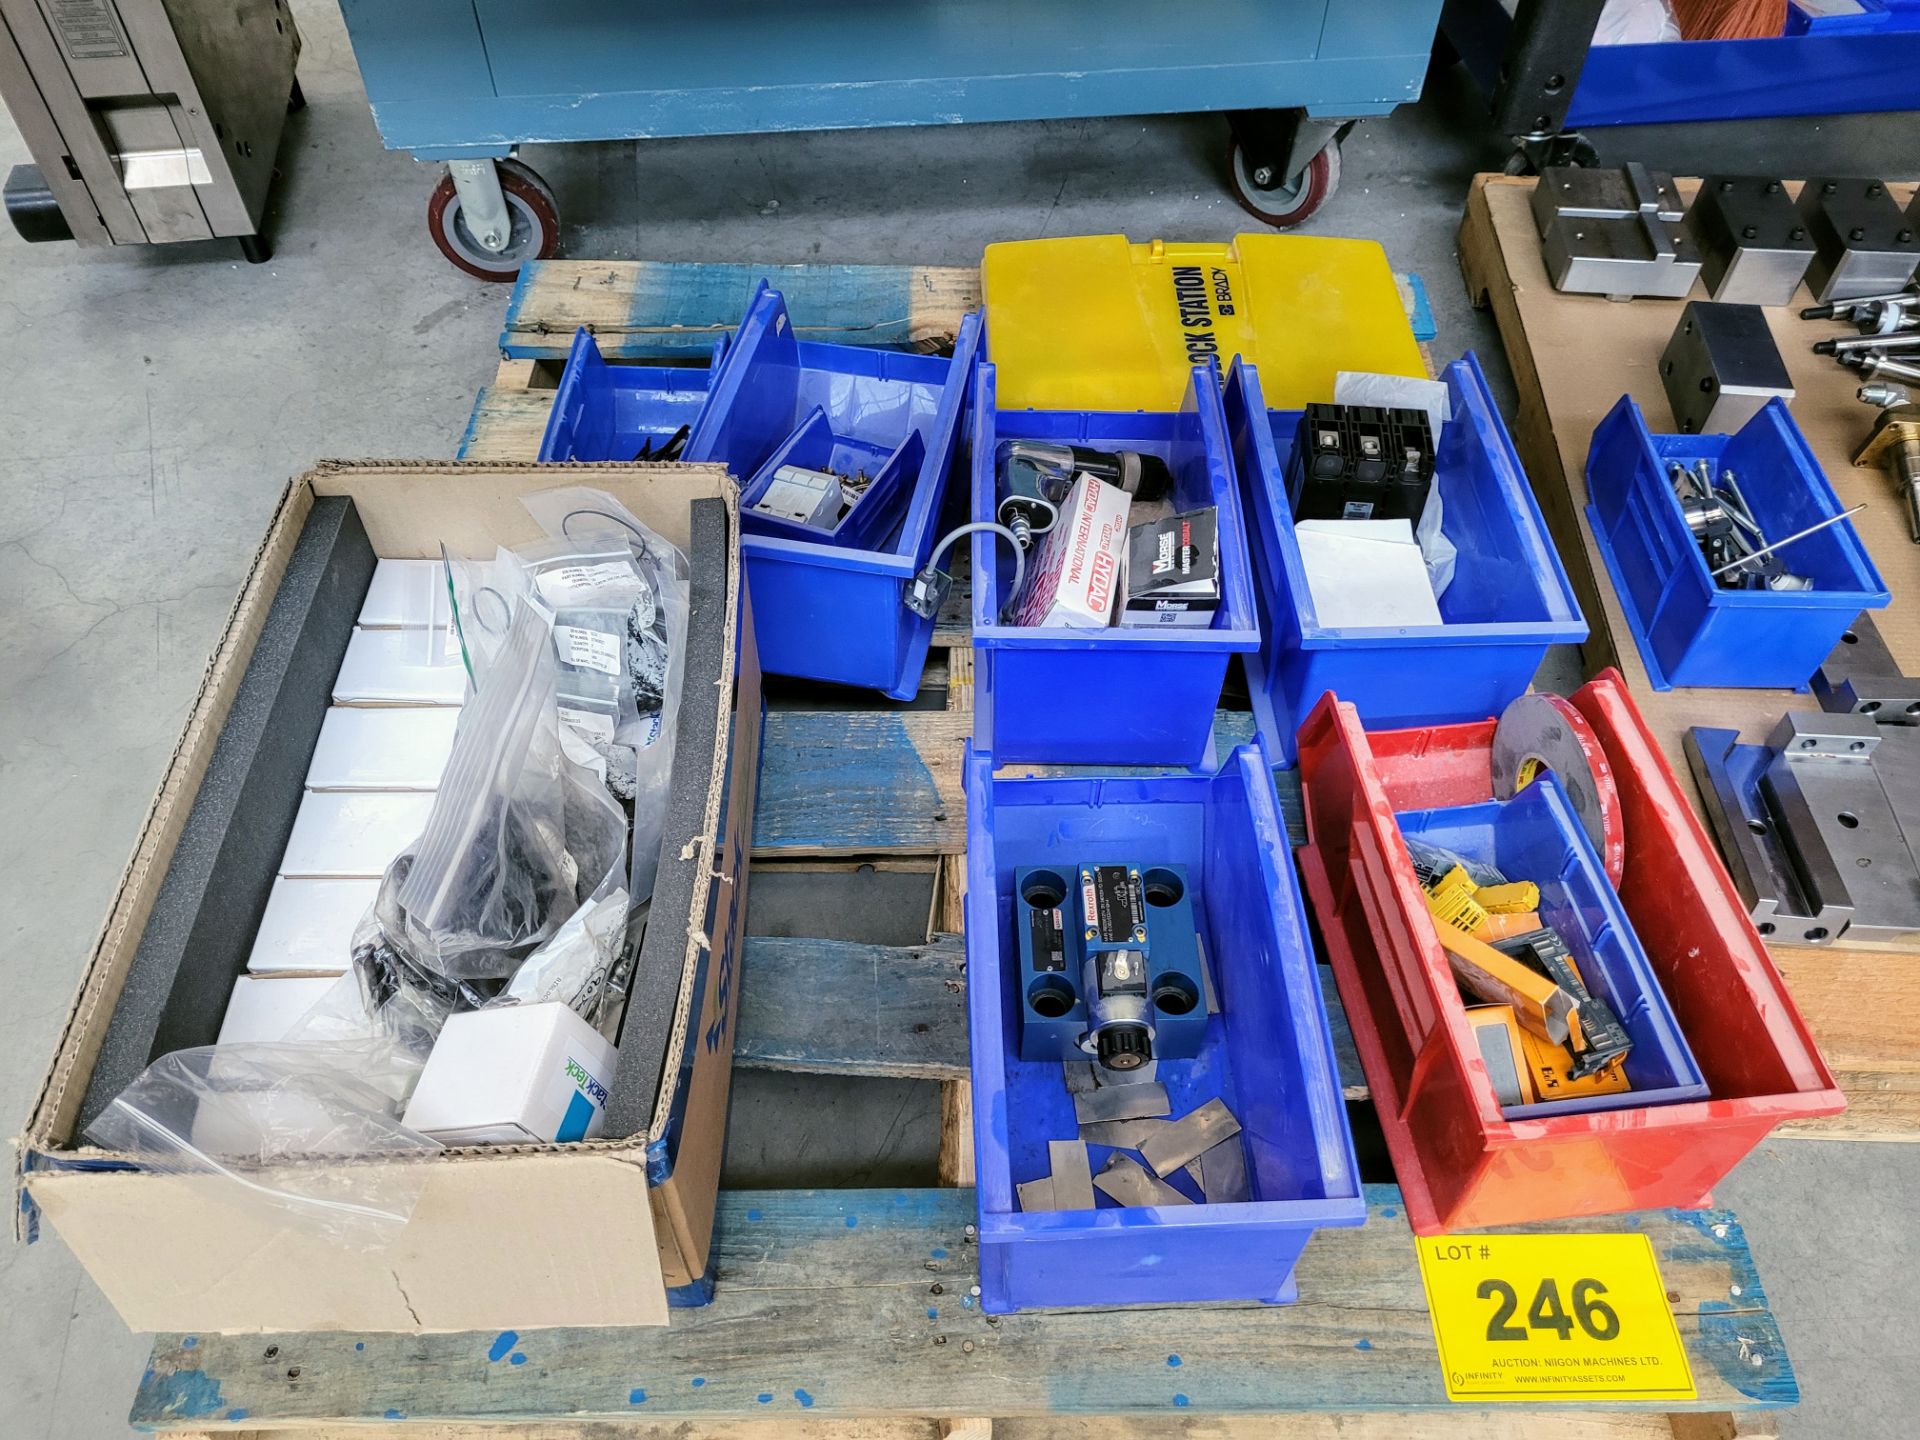 LOT- VALVES, X67 COMPONENTS, PUNEMATIC GUN, PAD LOCK STATION, DRILL BITS ETC. (LOCATED IN BUILDING